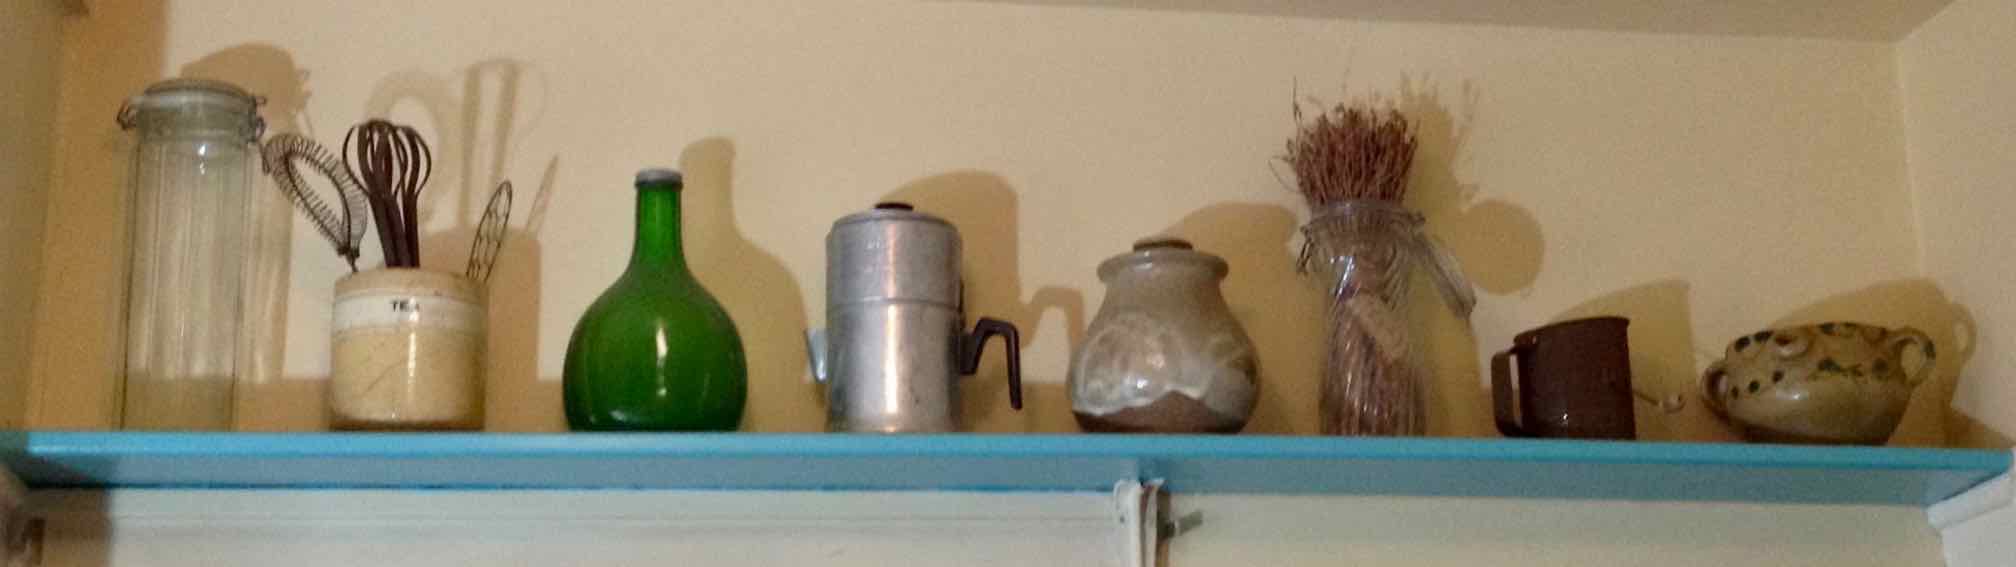 assortment of kitchen shelf items including antique tea cannister holding antique egg beaters, a cannister of Provence lavender and a Tunisian water pitcher